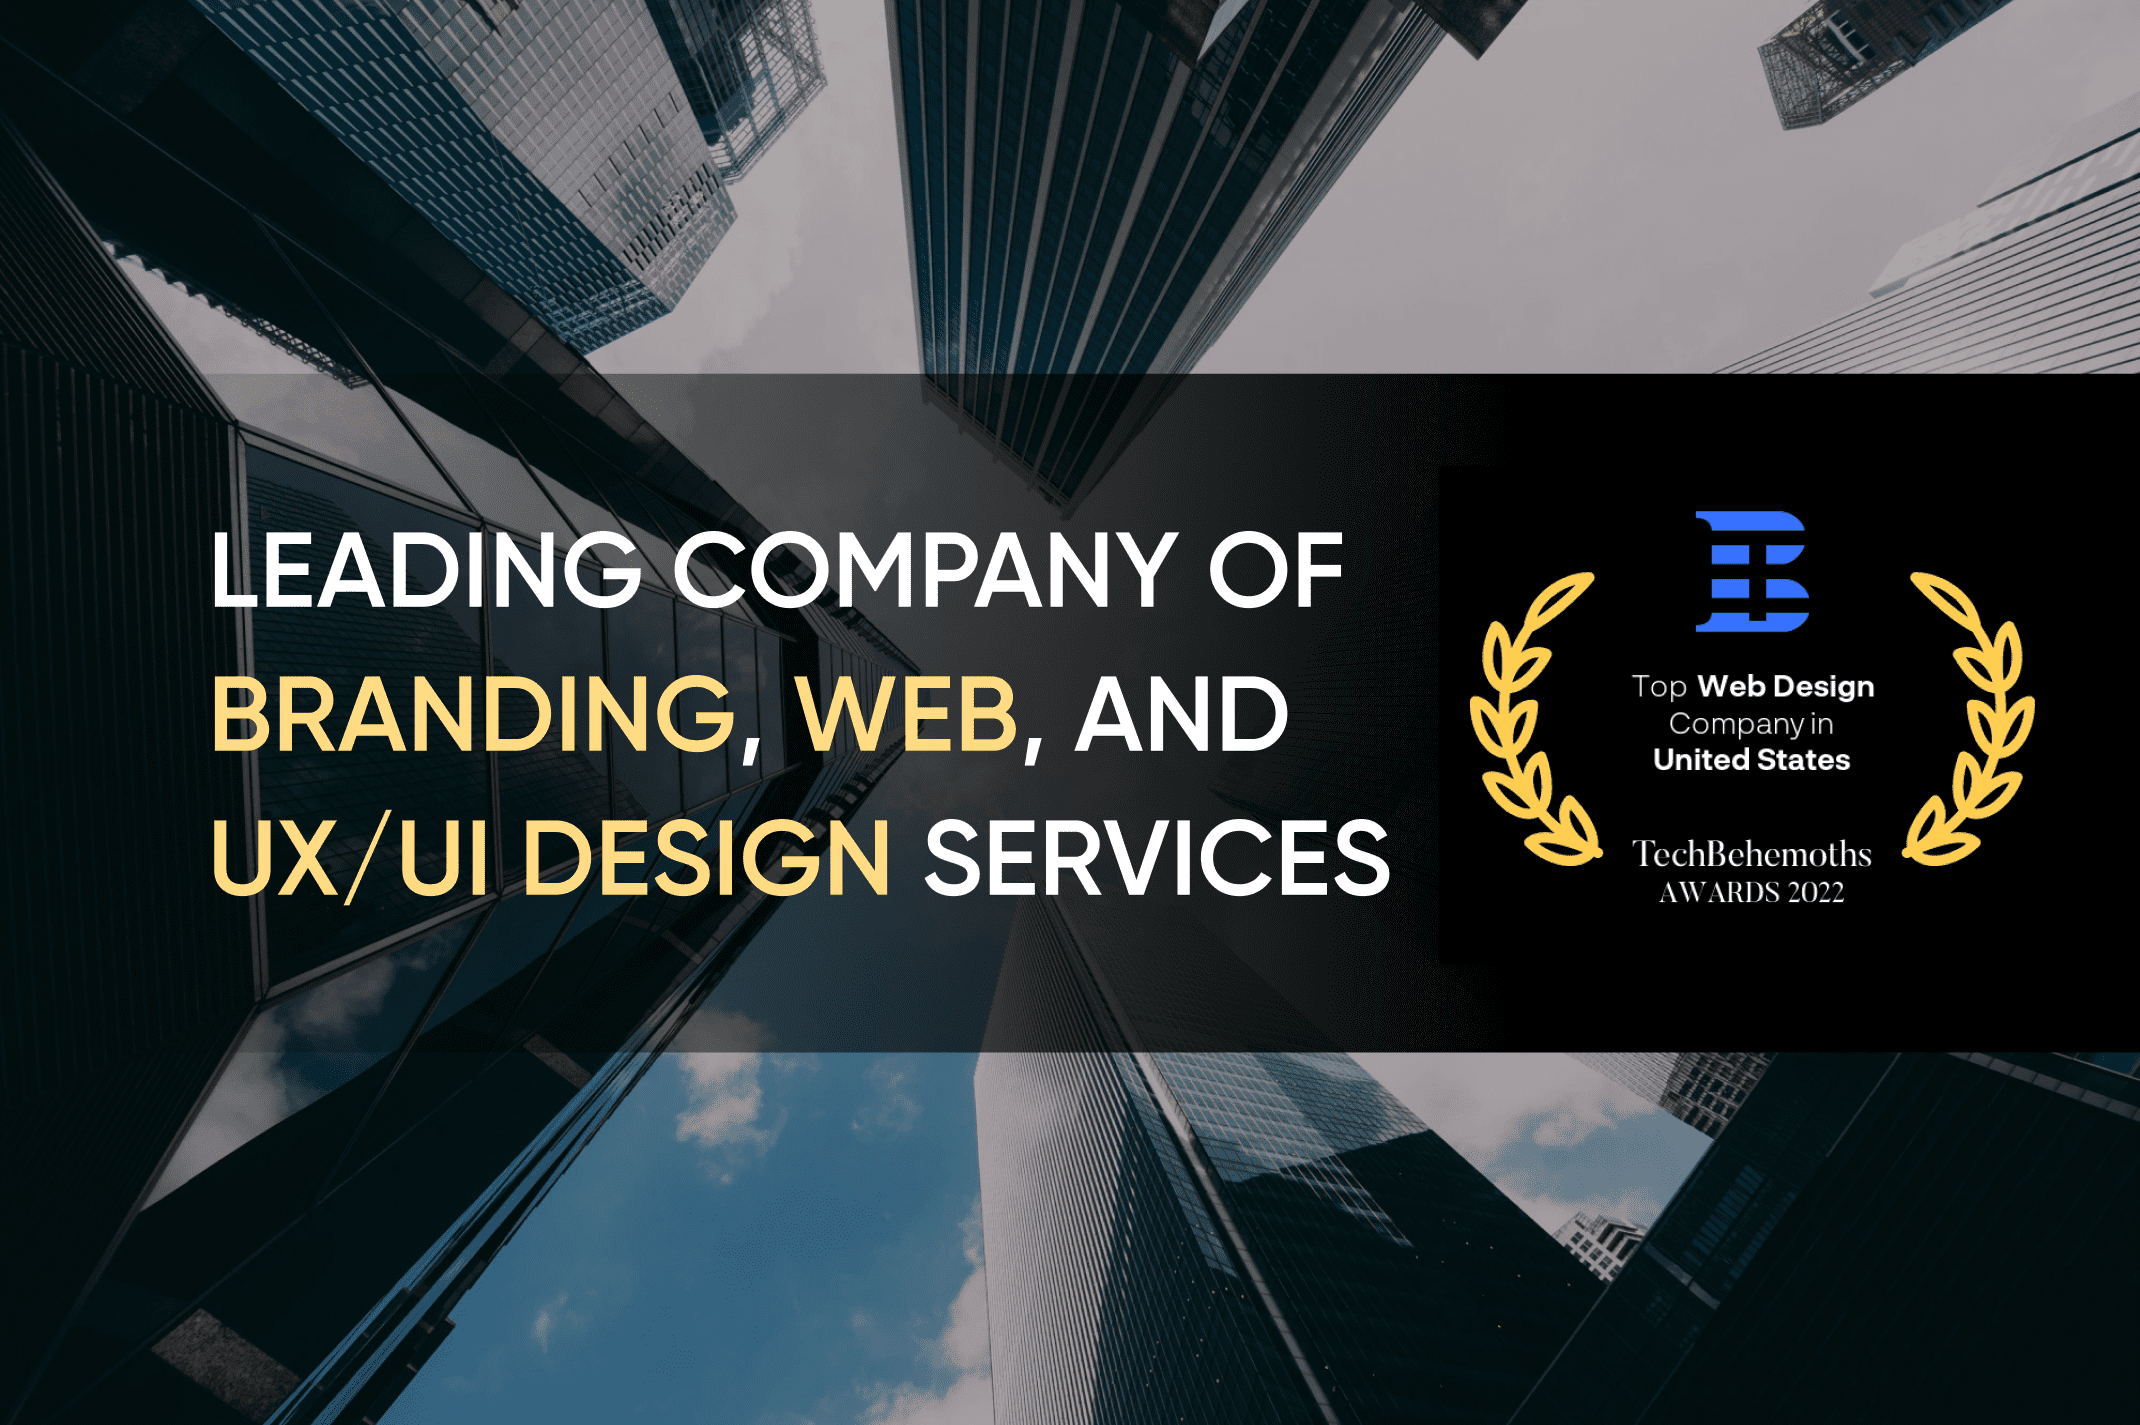 TechBehemoths Awards SolidBrain As a Leading Company Of Branding, Web, and UX/UI Design Services in the USA | SolidBrain